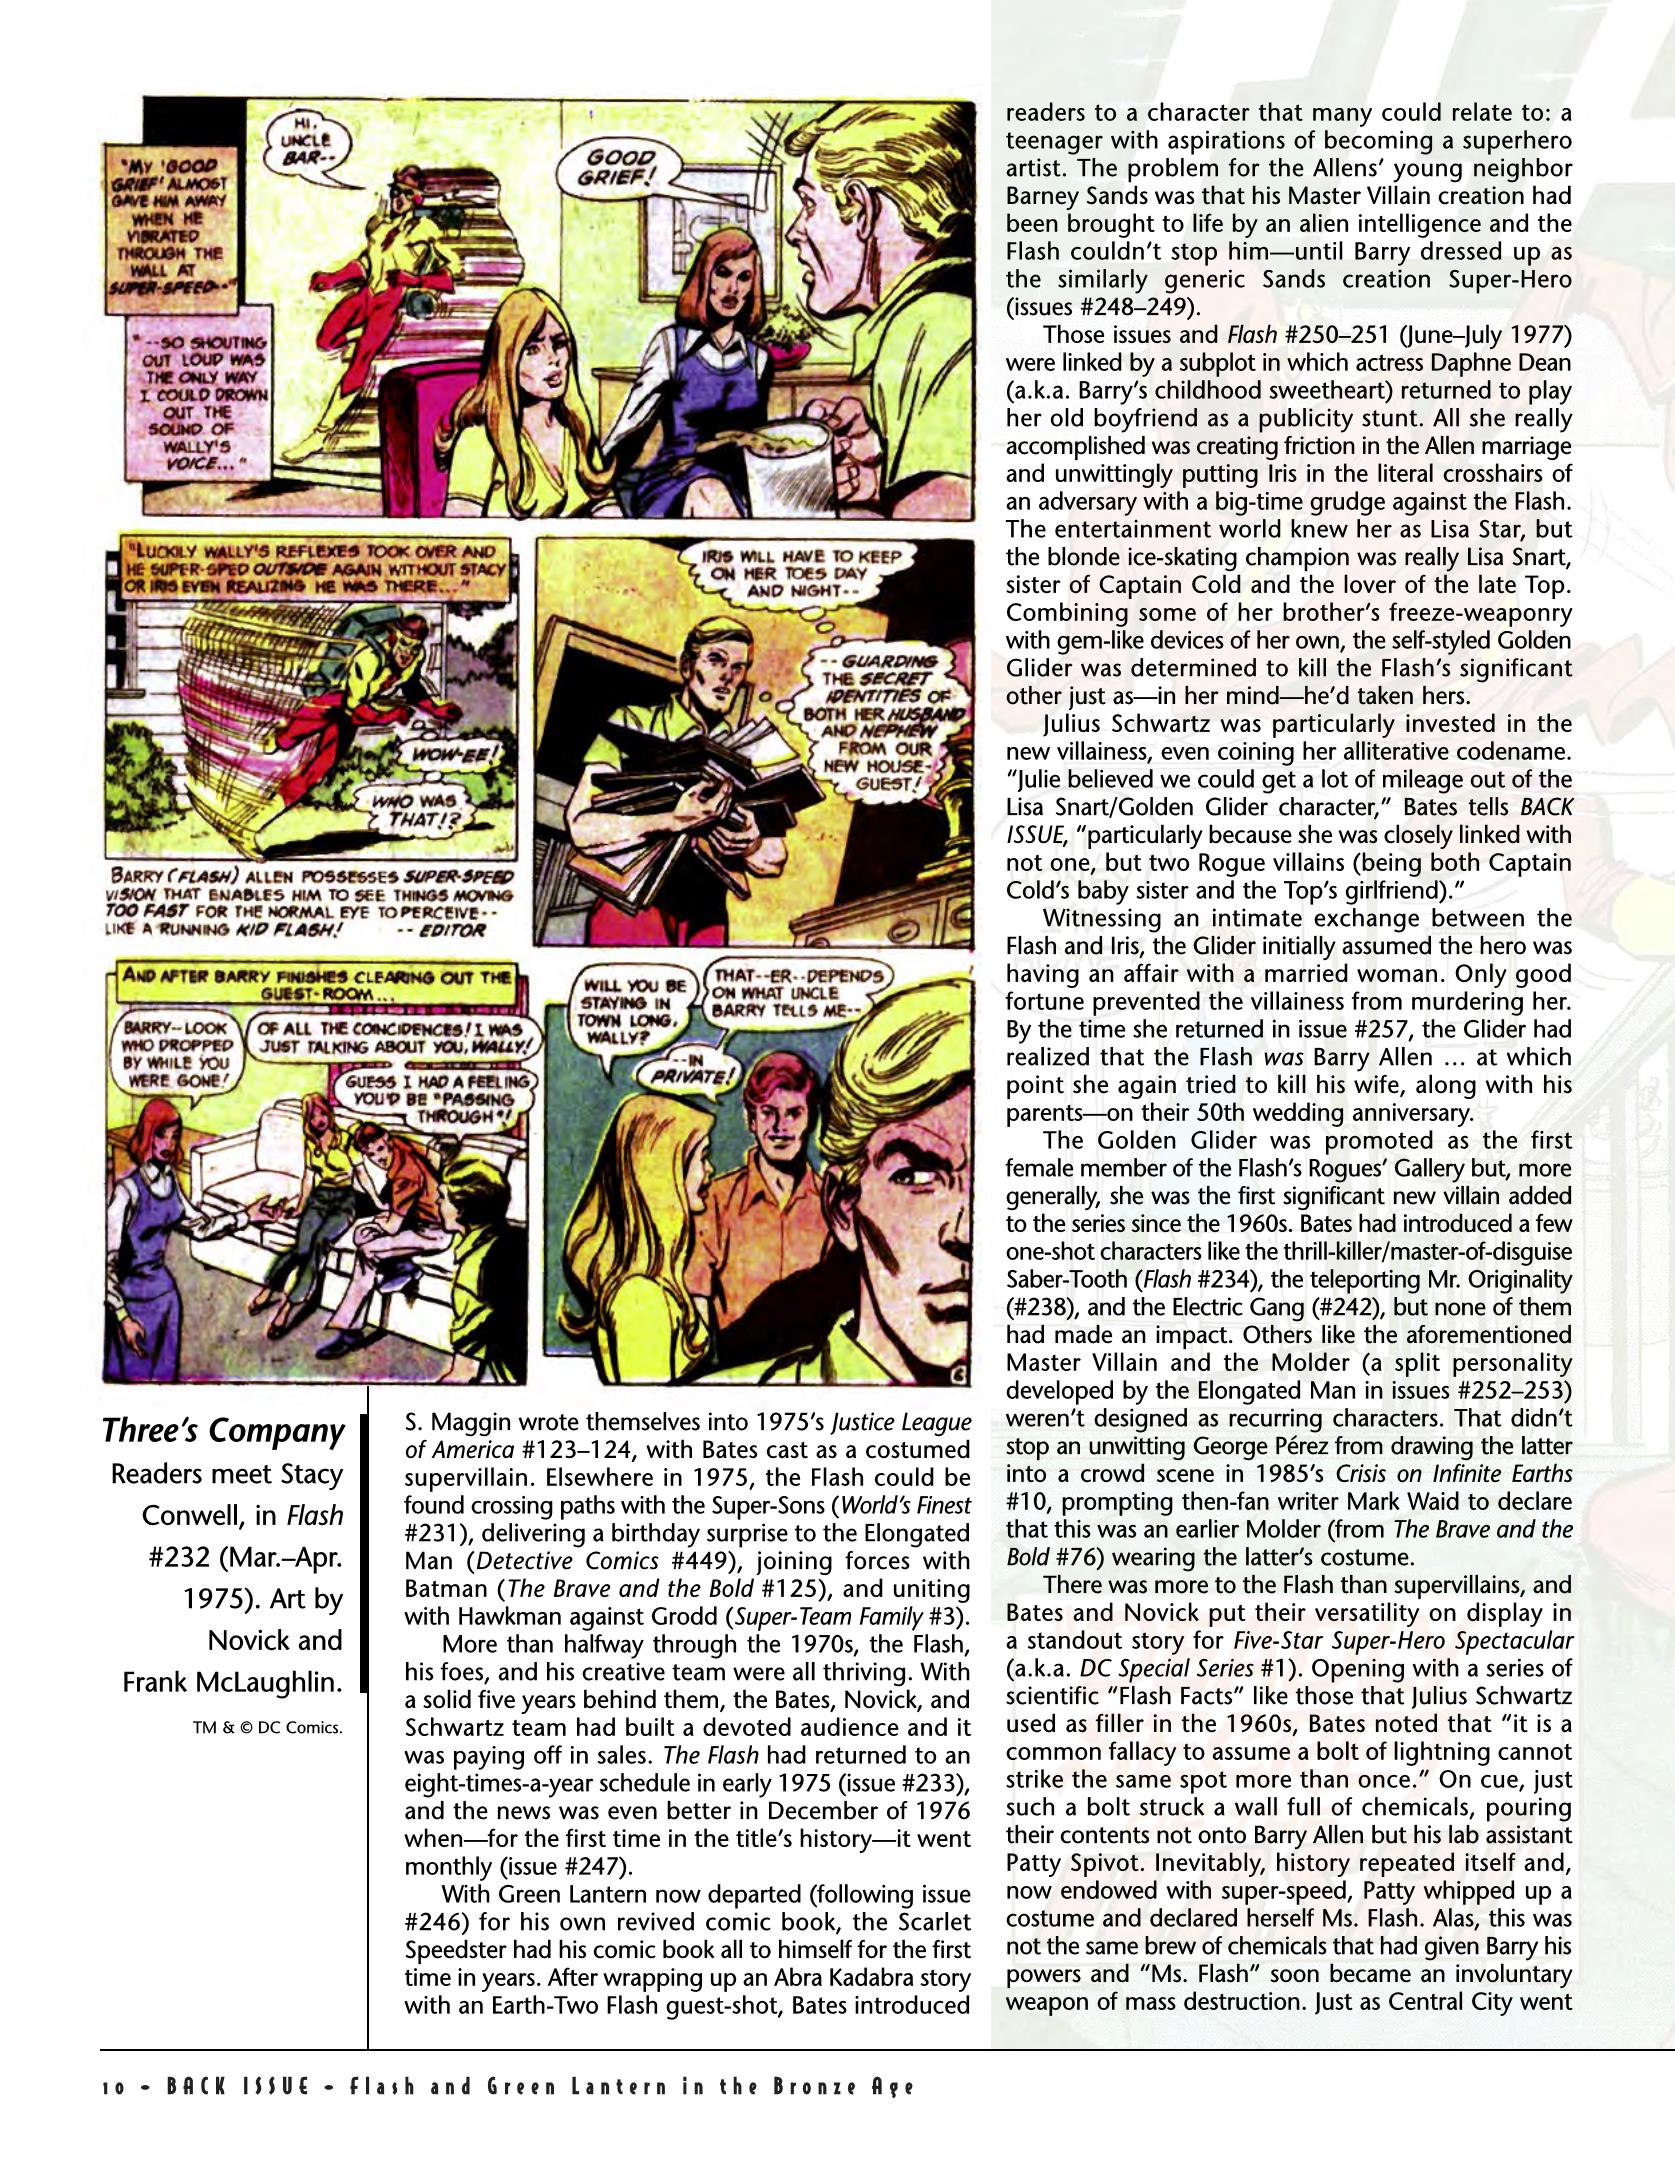 Read online Back Issue comic -  Issue #80 - 12